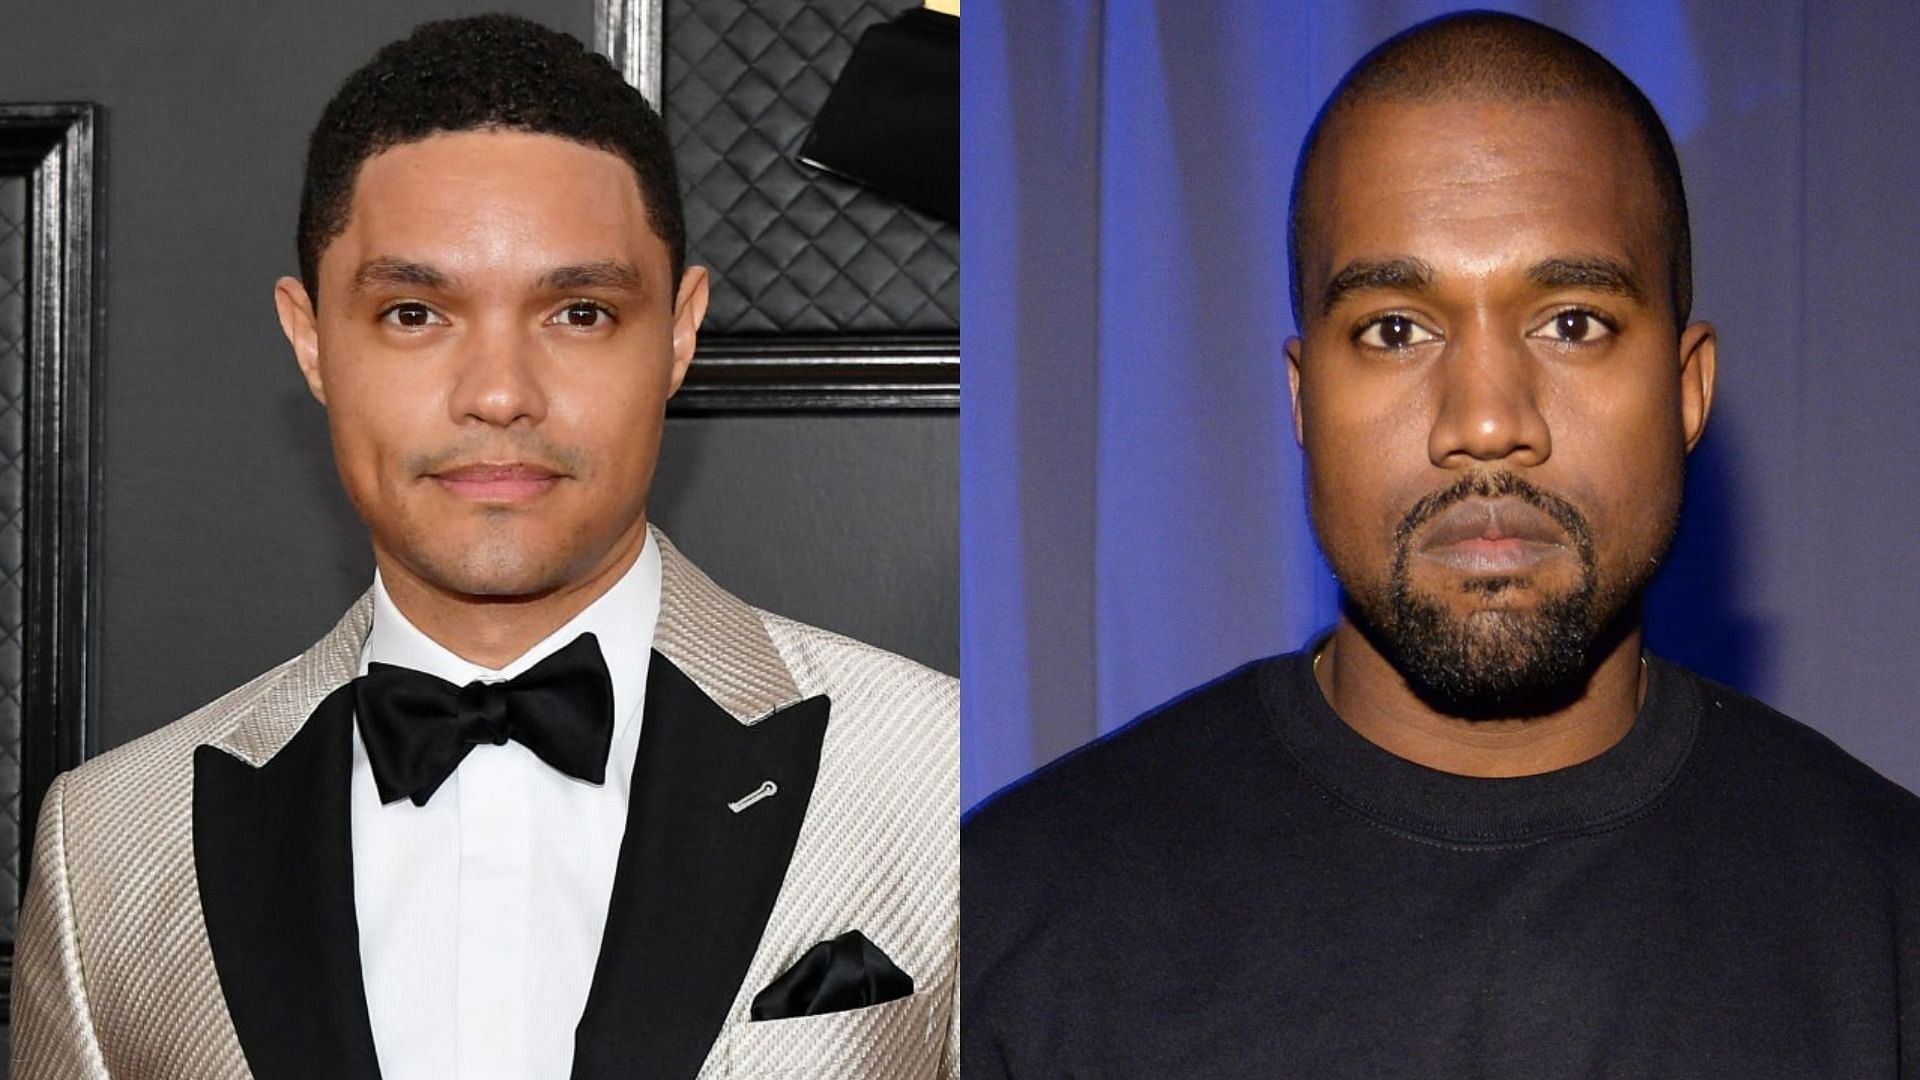 Kanye West made a racially offensive comment against Trevor Noah on social media (Image via Amy Sussman/Getty Images and Kevin Mazur/Getty Images)